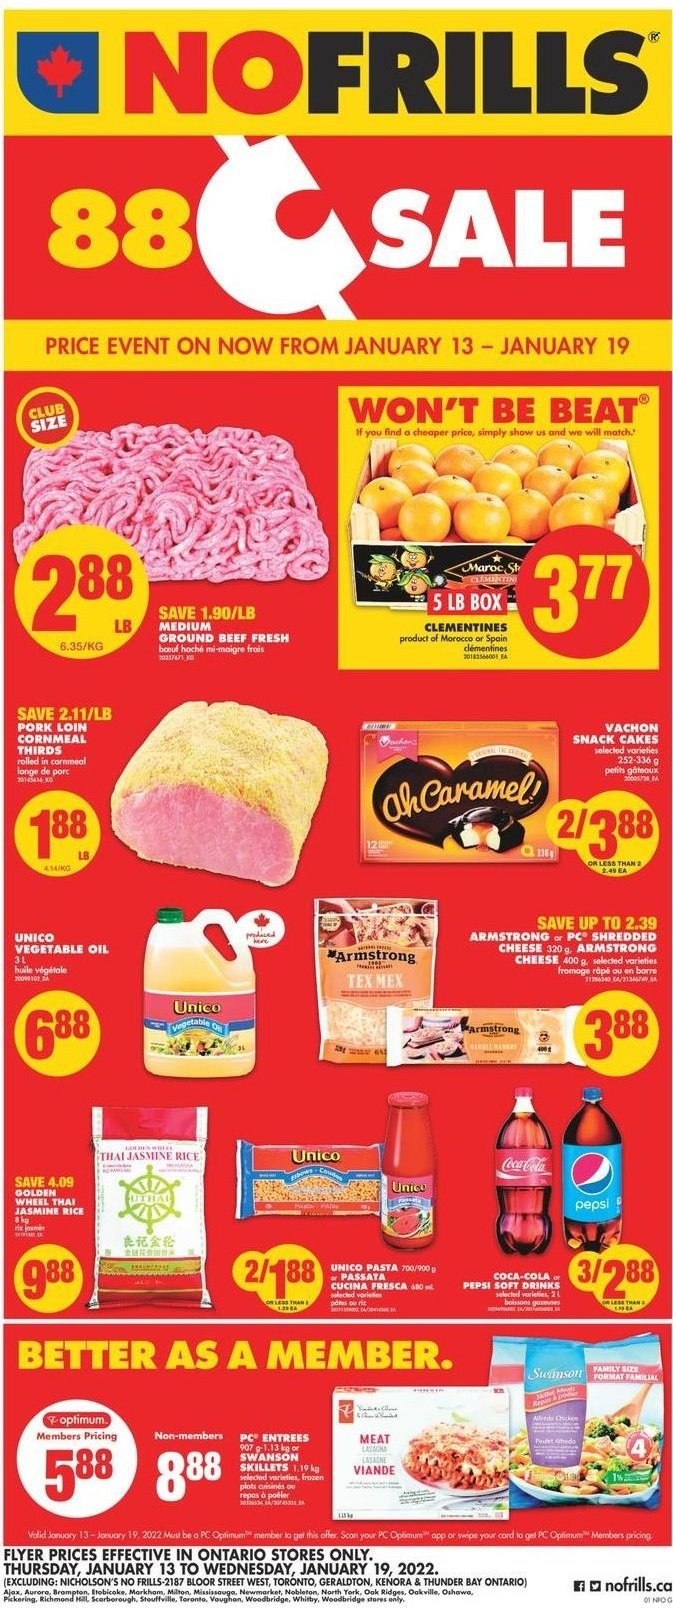 No Frills Flyer - January 13, 2022 - January 19, 2022 - Sales products - cake, clementines, pasta, lasagna meal, shredded cheese, snack, rice, jasmine rice, vegetable oil, oil, Coca-Cola, Pepsi, soft drink, beef meat, ground beef, pork loin, pork meat, Ajax. Page 1.